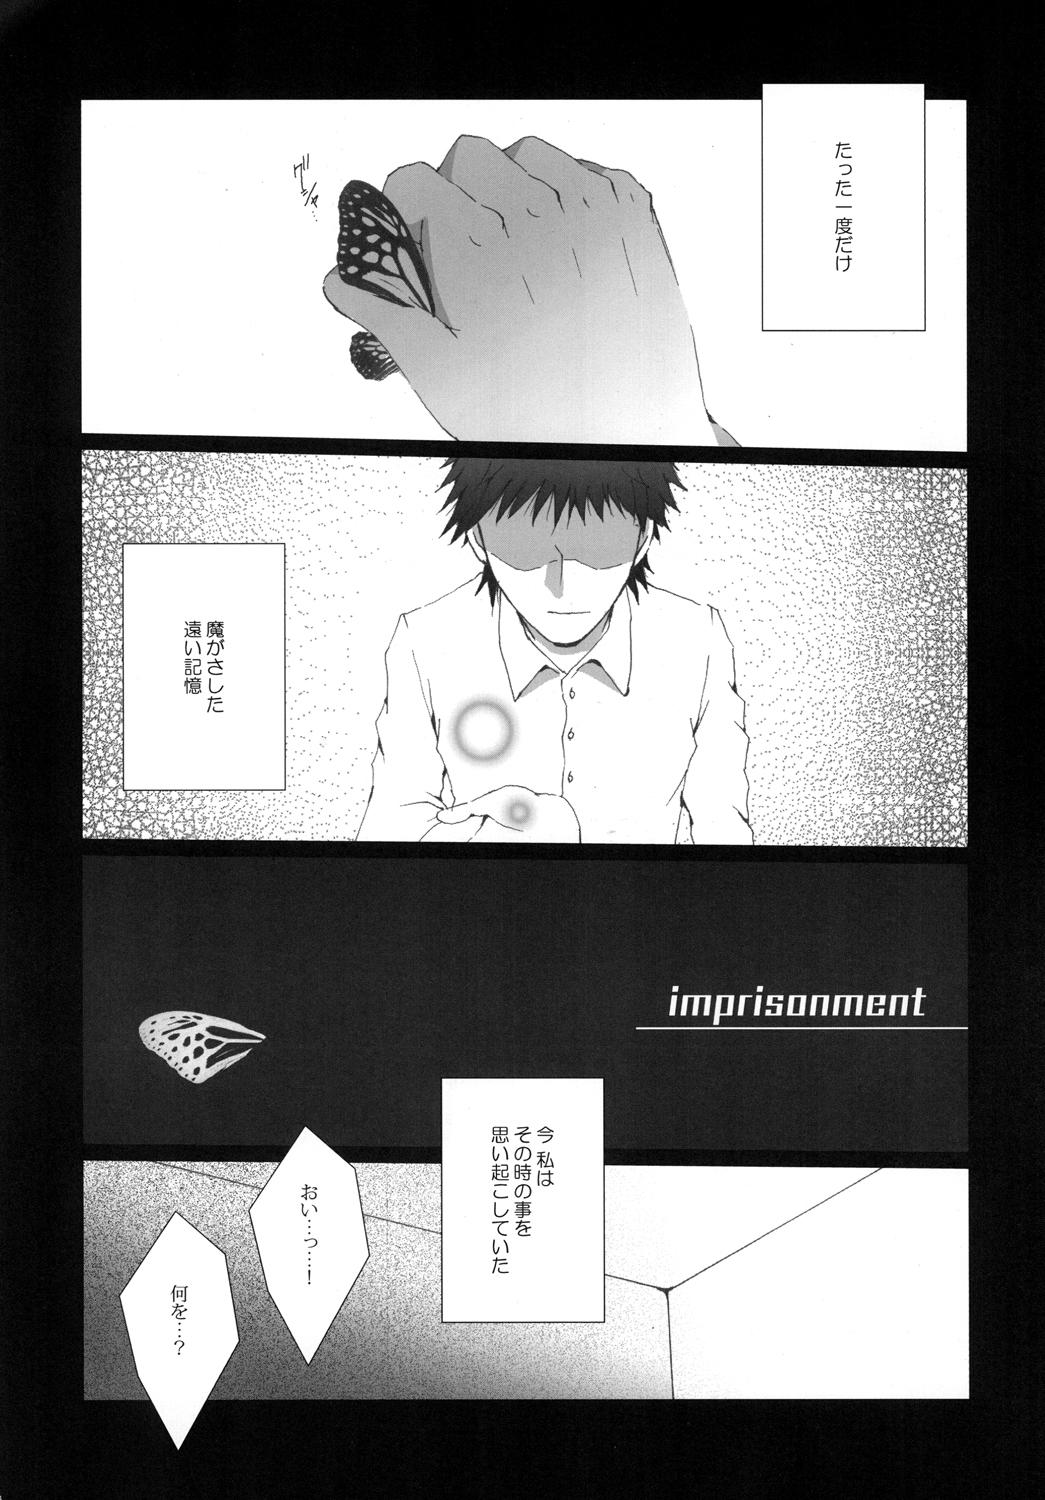 Foreplay Imprisonment - Fate zero Kissing - Page 5